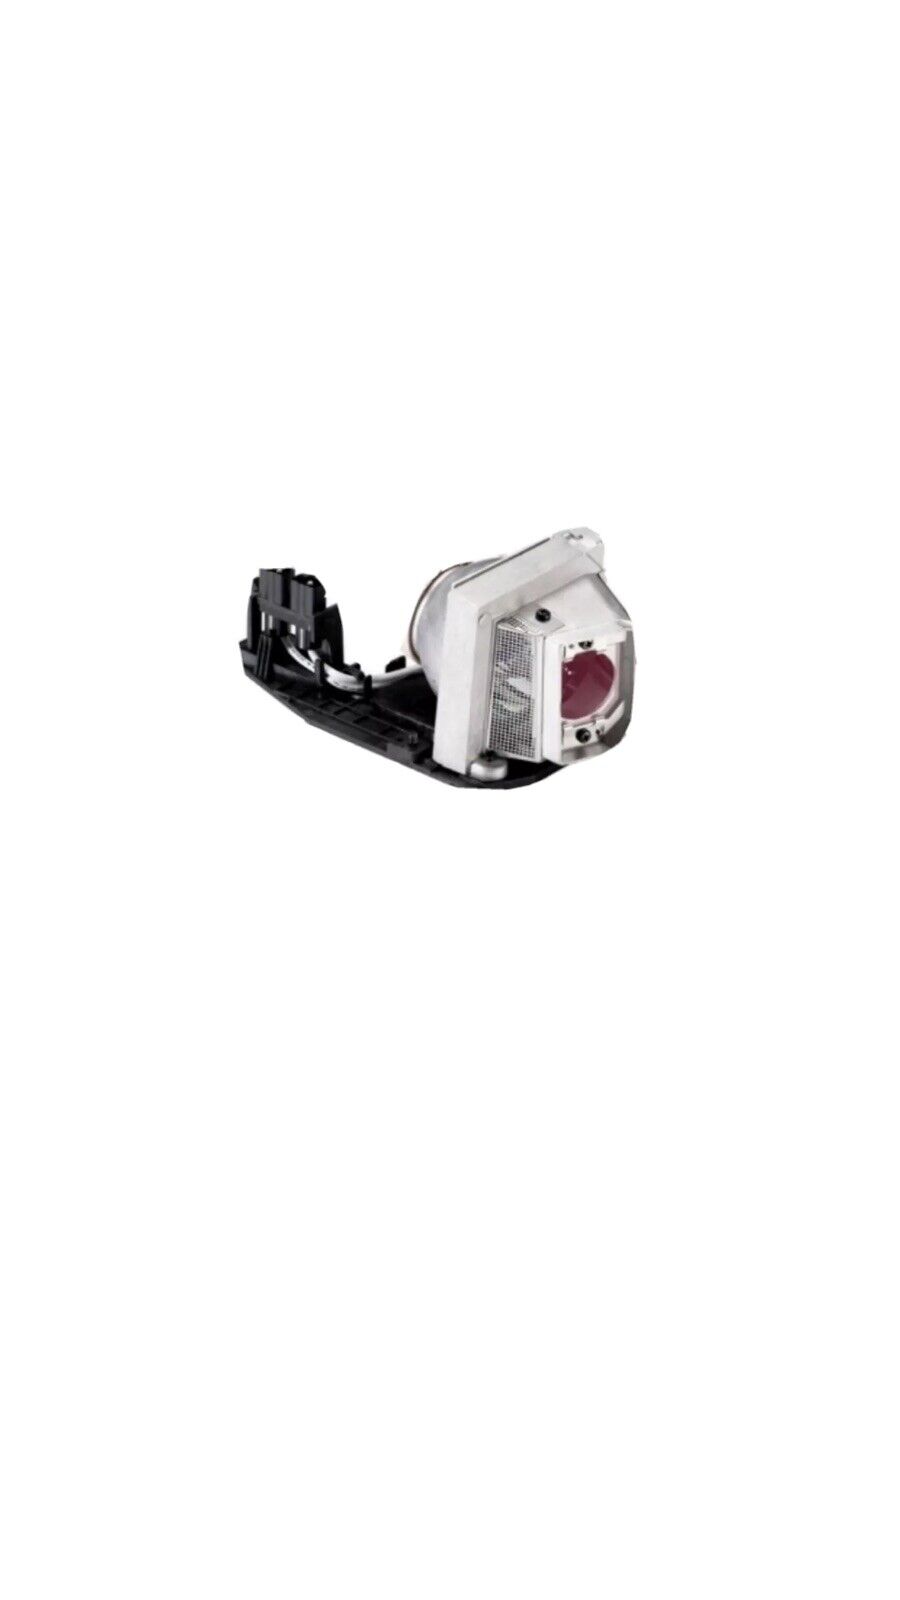 DELL 330-6581 3306581 725-10229 OEM LAMP FOR 1510X 1610HD 1610X  - Made By DELL